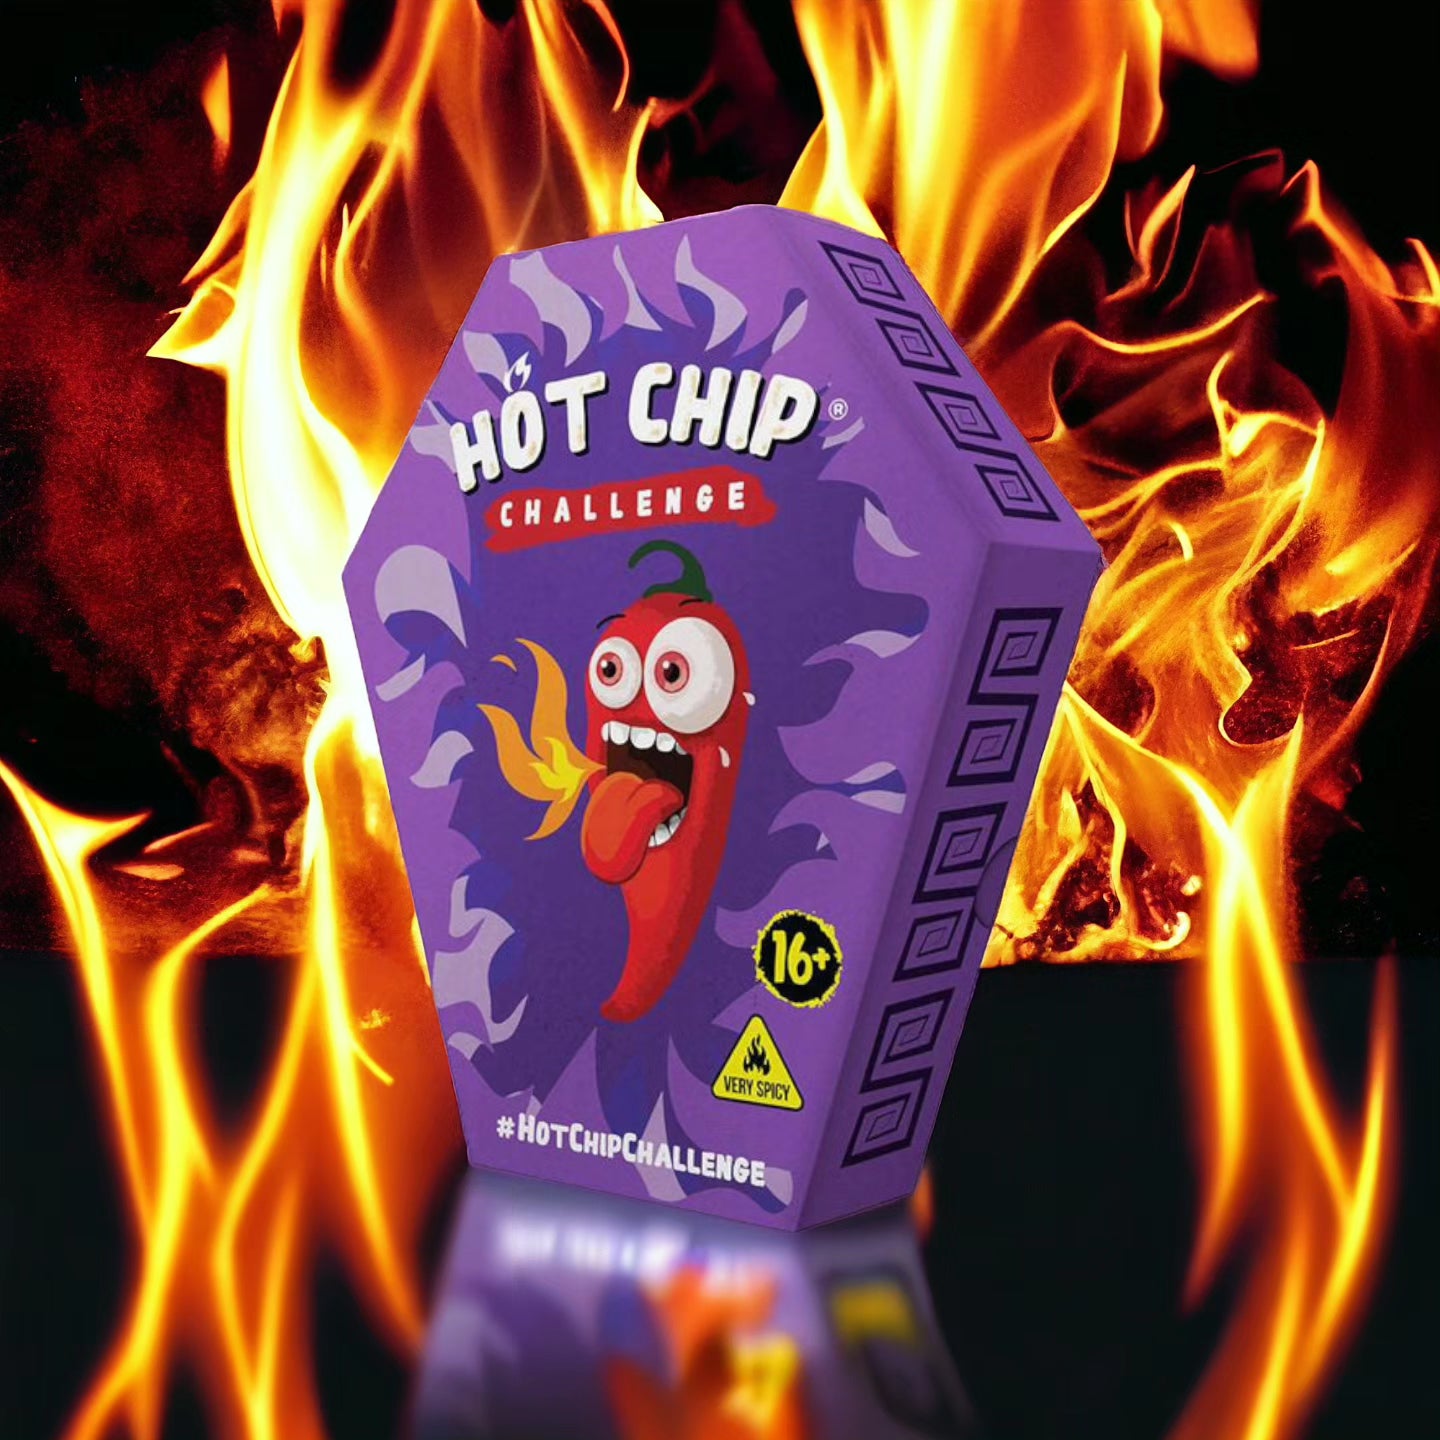 Hot Choc Challenge and Hot Chip Challenge Pack